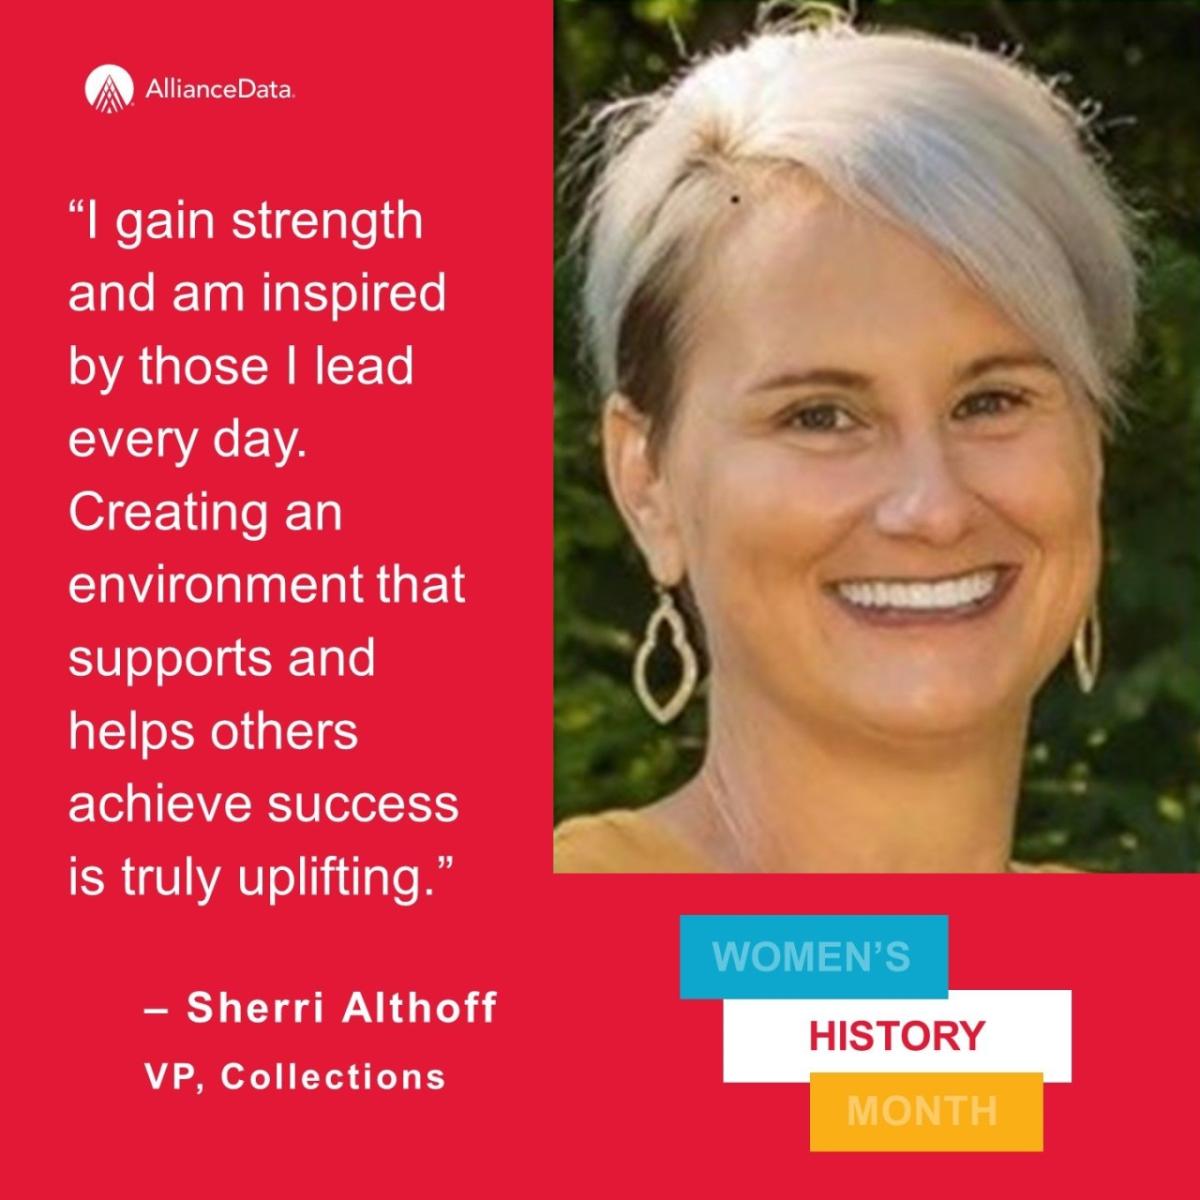 Sherri Althoff, VP Collections headshot, "Women's History Month" and "I gain strength and am inspired by those I lead every day. Creating an environment that supports and helps others achieve success is truly uplifting."